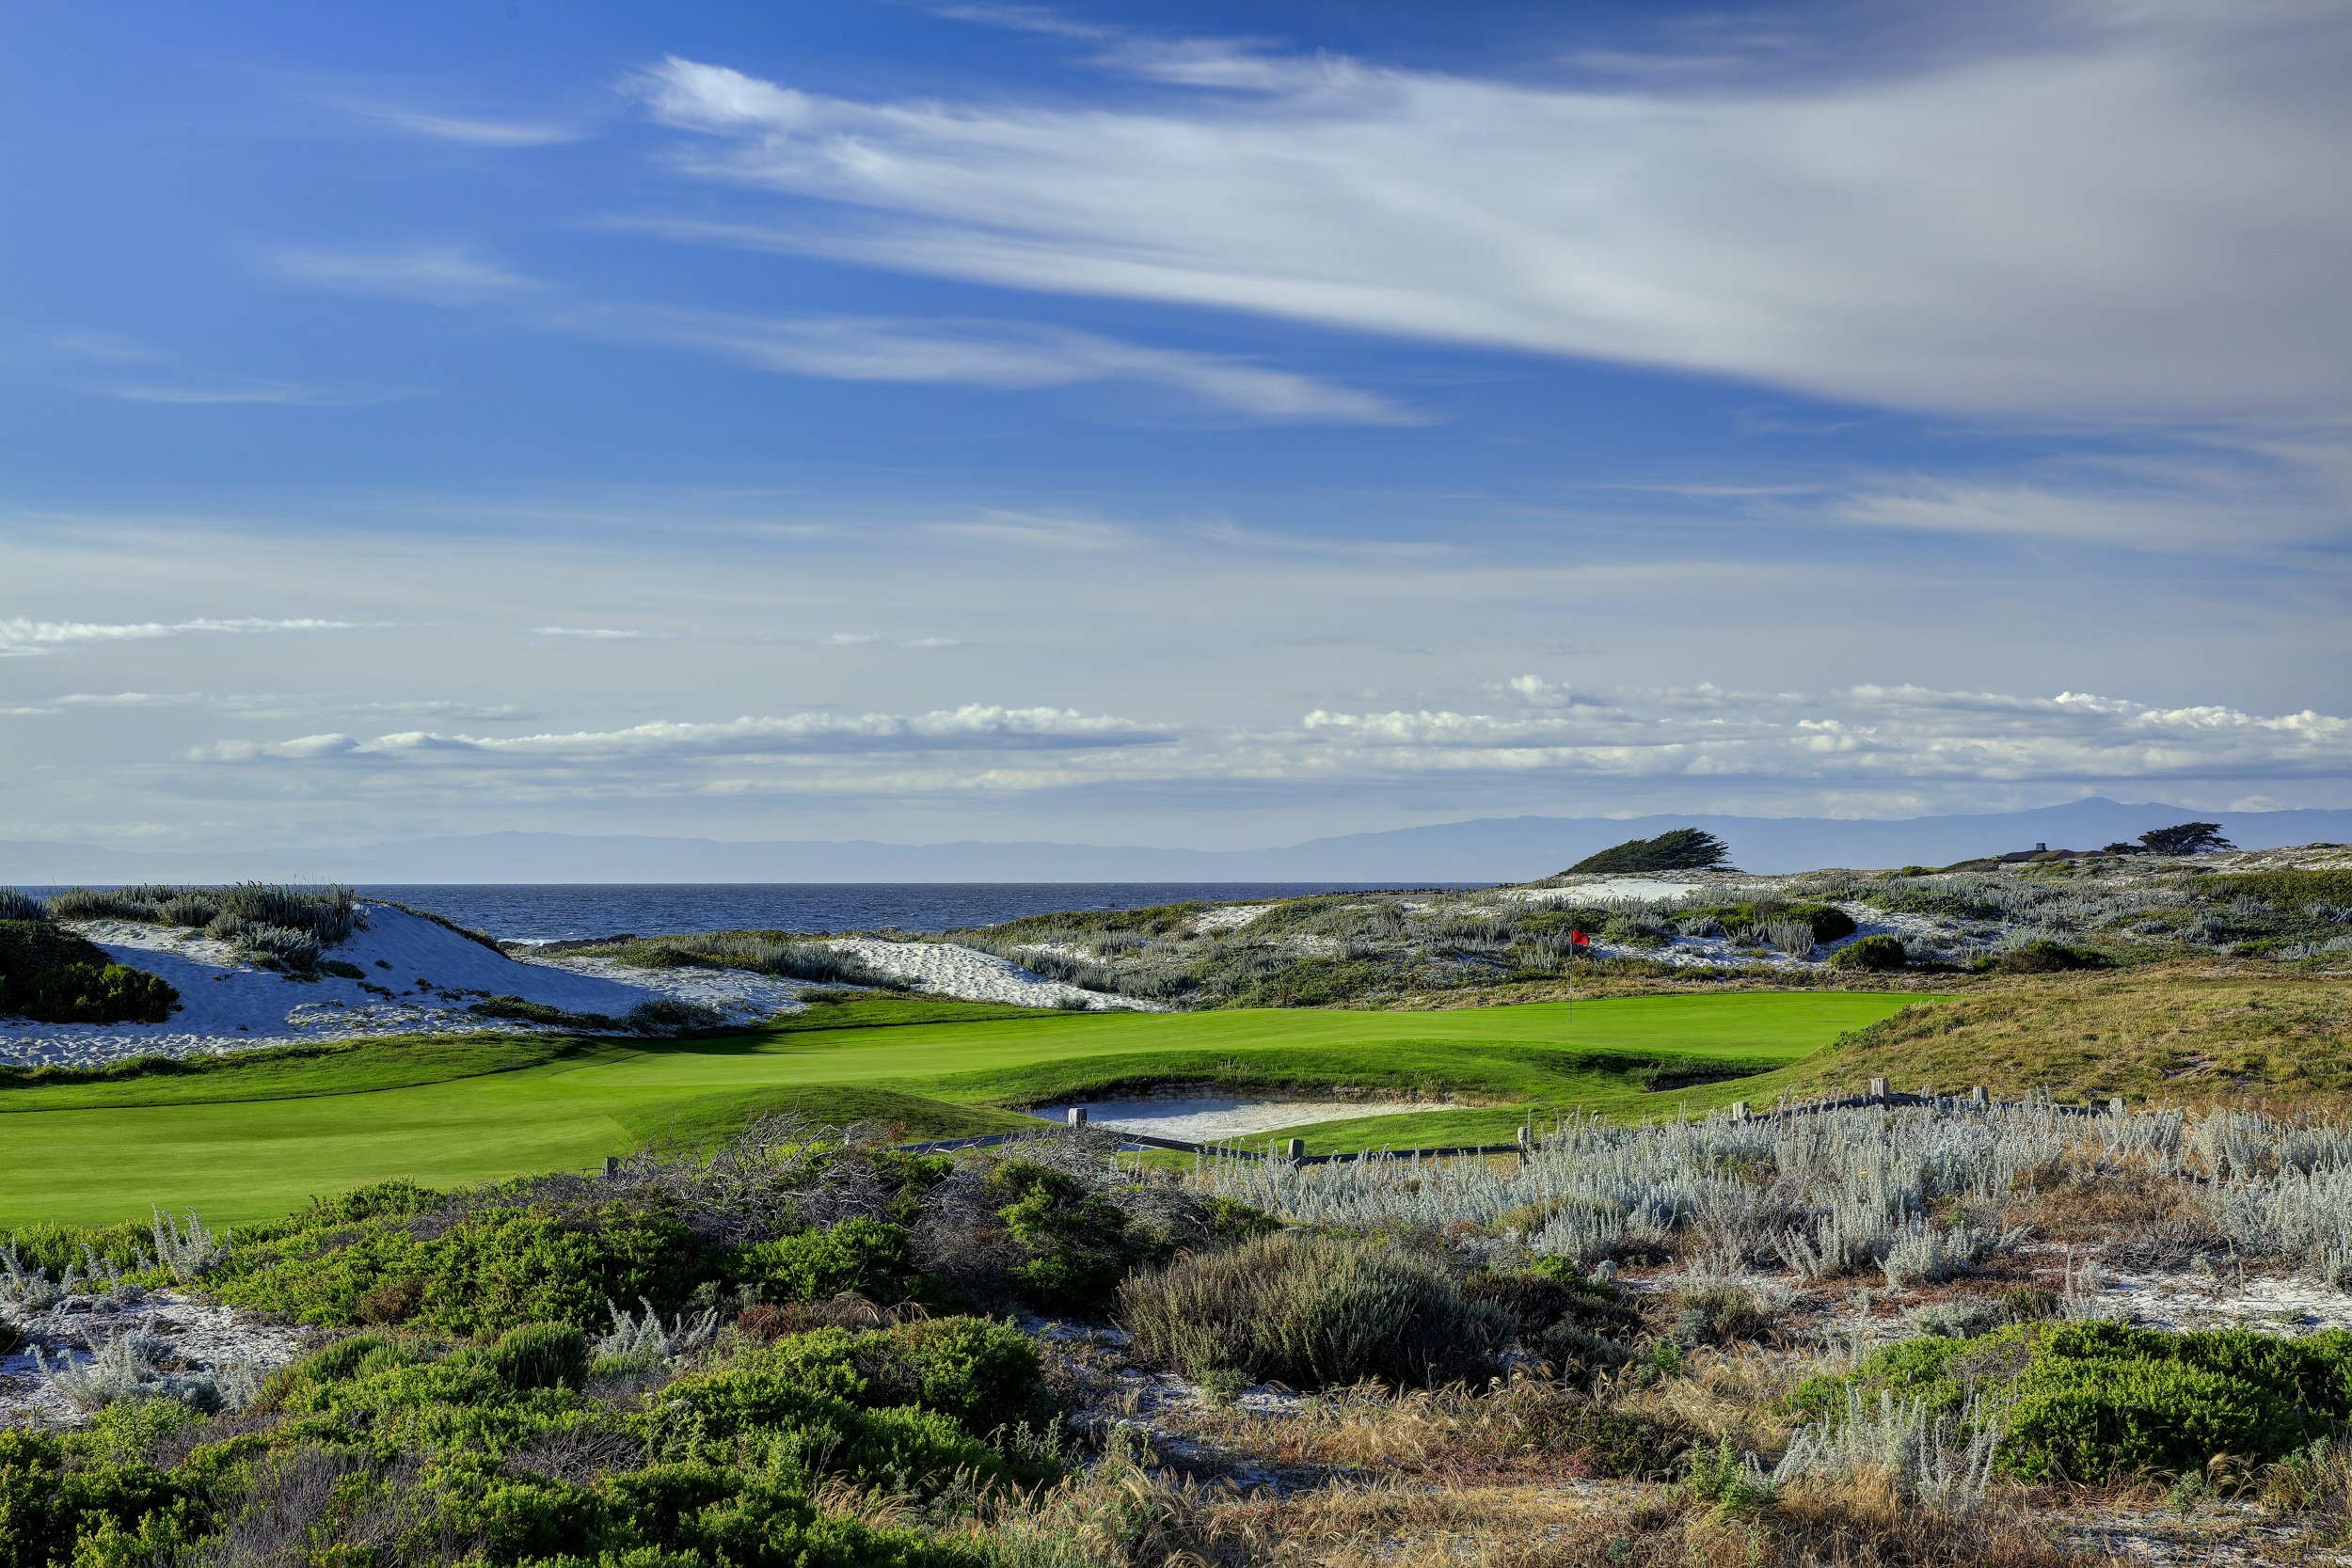 A green golf course surrounded with short shrubs and the ocean in the distance on a partly cloudy day.